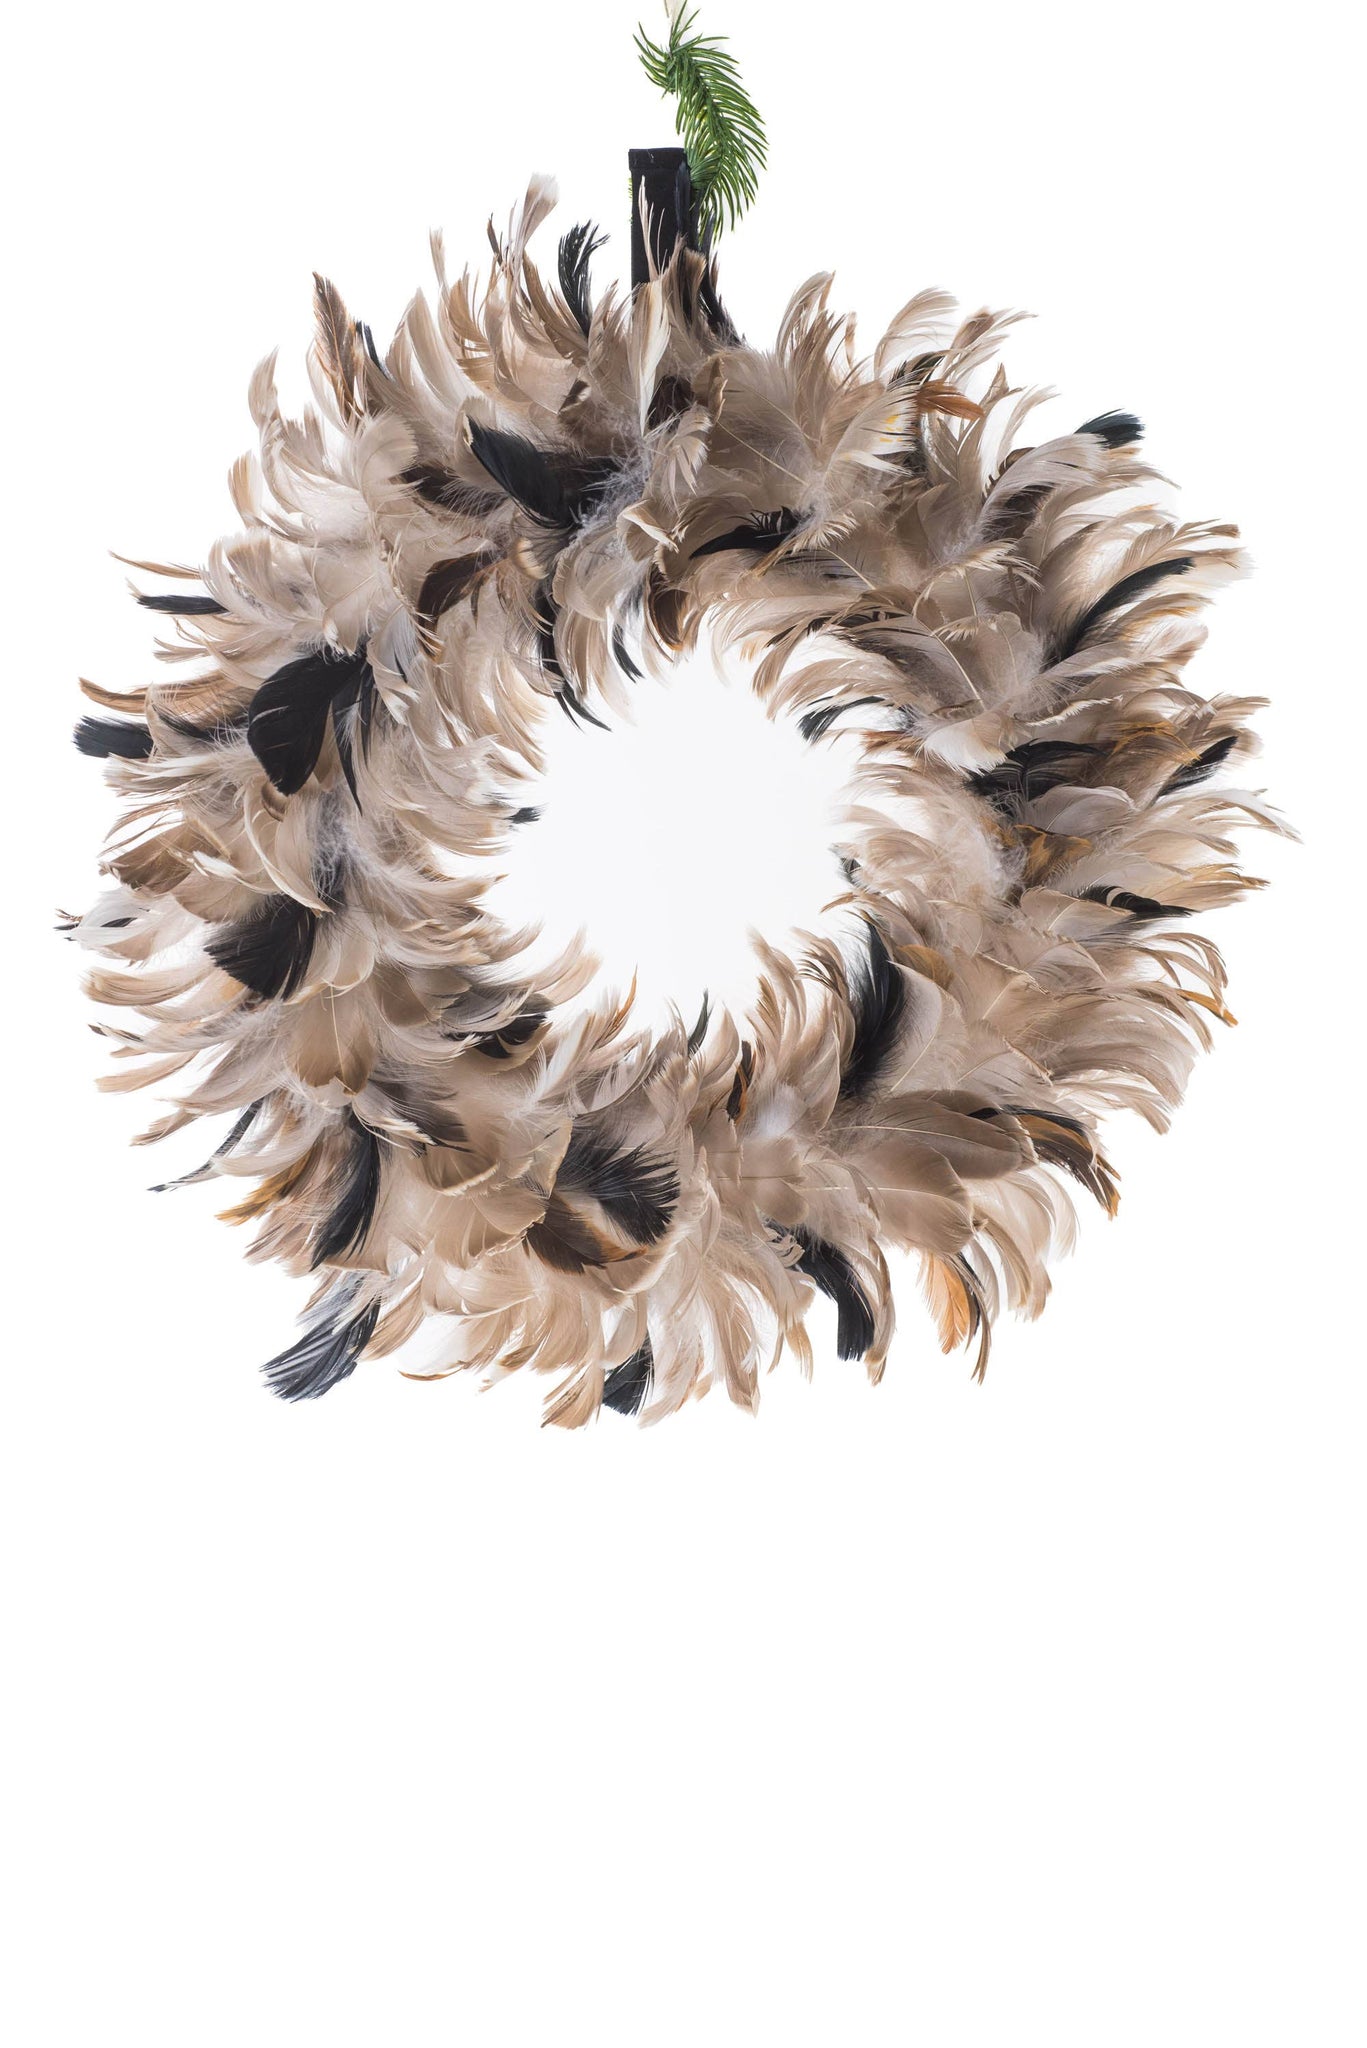 Cream Polylon Feathered Wreath with Black Accents